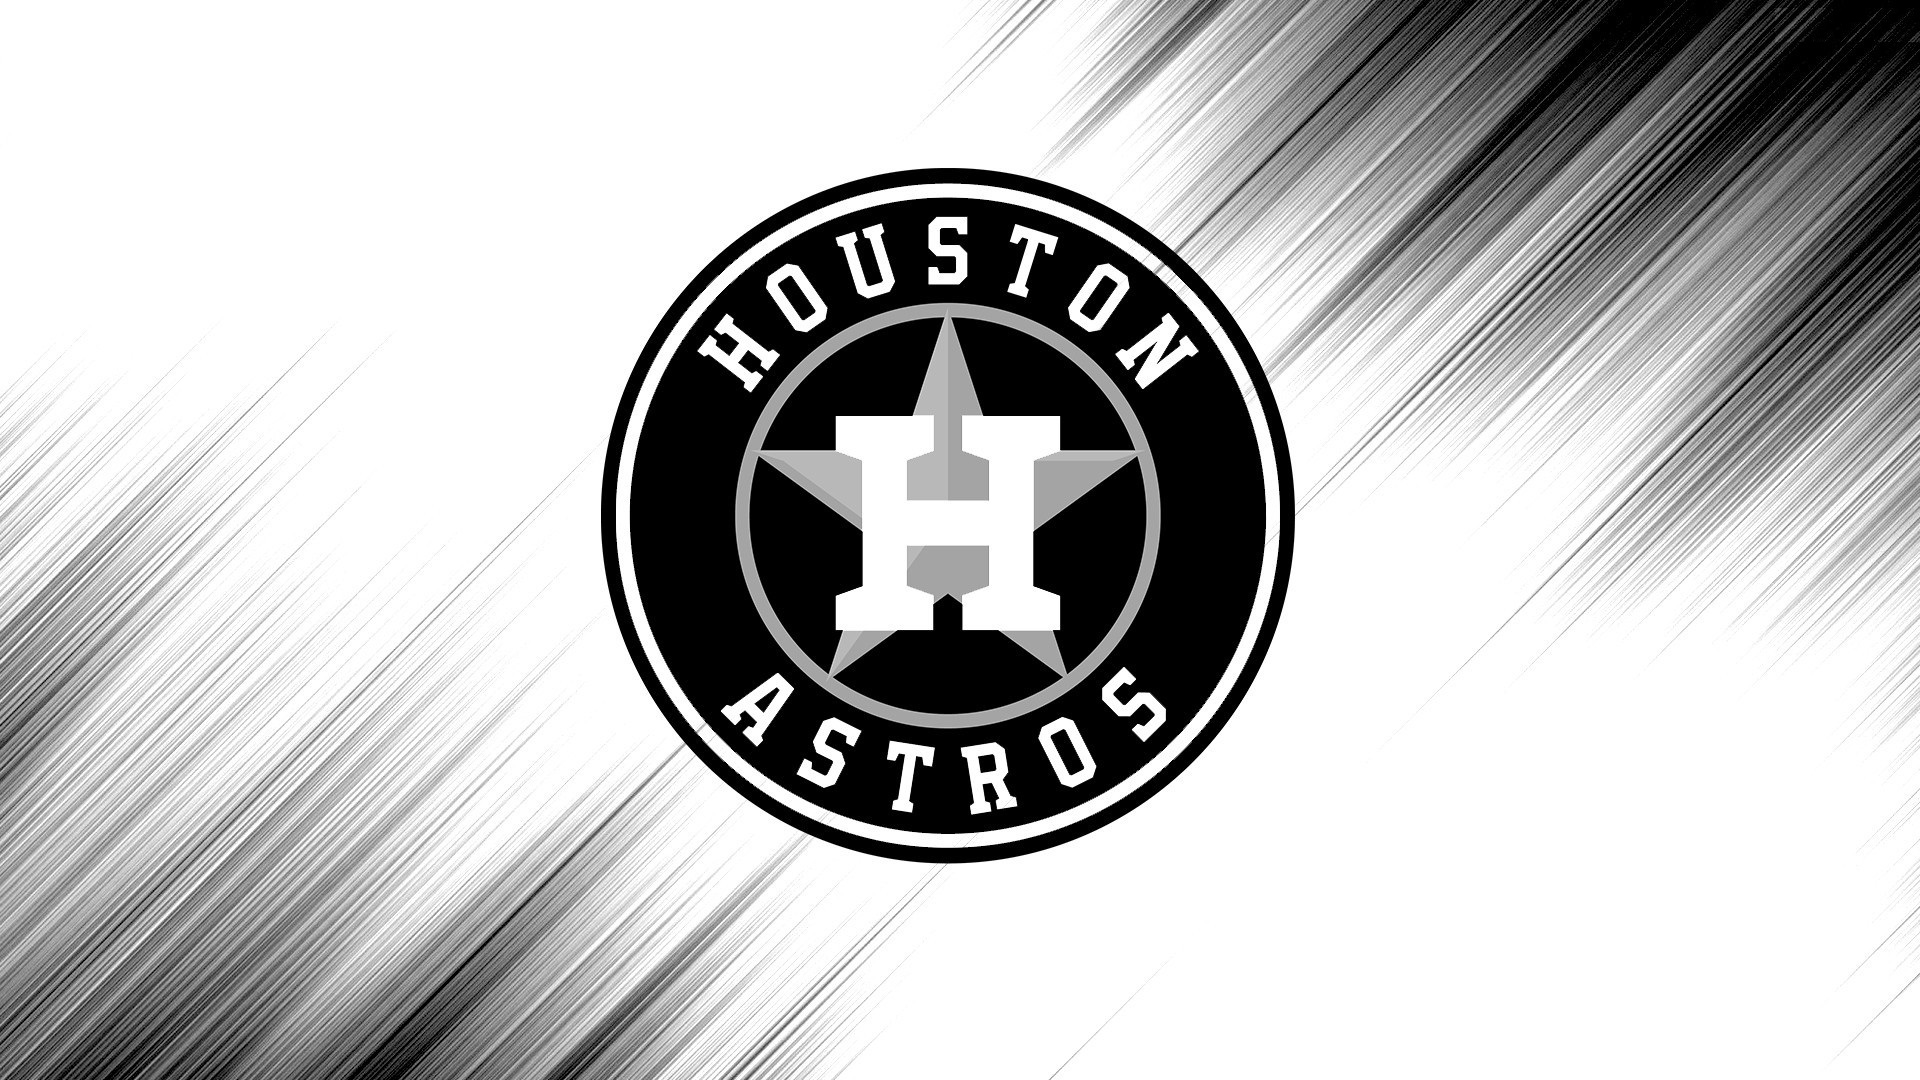 HD Backgrounds Houston Astros Logo With high-resolution 1920X1080 pixel. You can use this wallpaper for Mac Desktop Wallpaper, Laptop Screensavers, Android Wallpapers, Tablet or iPhone Home Screen and another mobile phone device